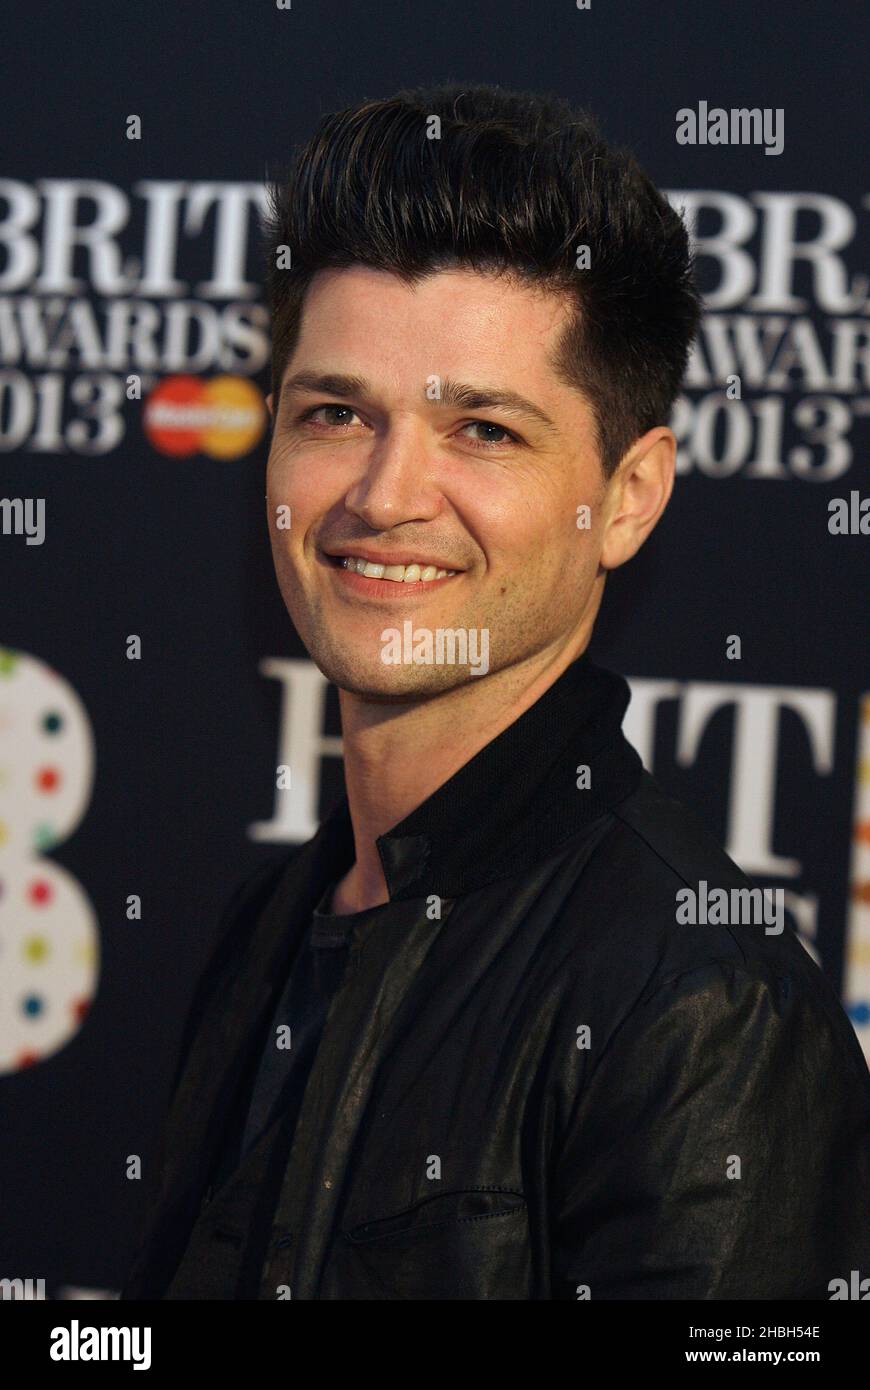 Danny O'Donoghue of The Script attending the Brit Awards 2013 Nominations Arrivals at the Savoy Hotel in London. Stock Photo